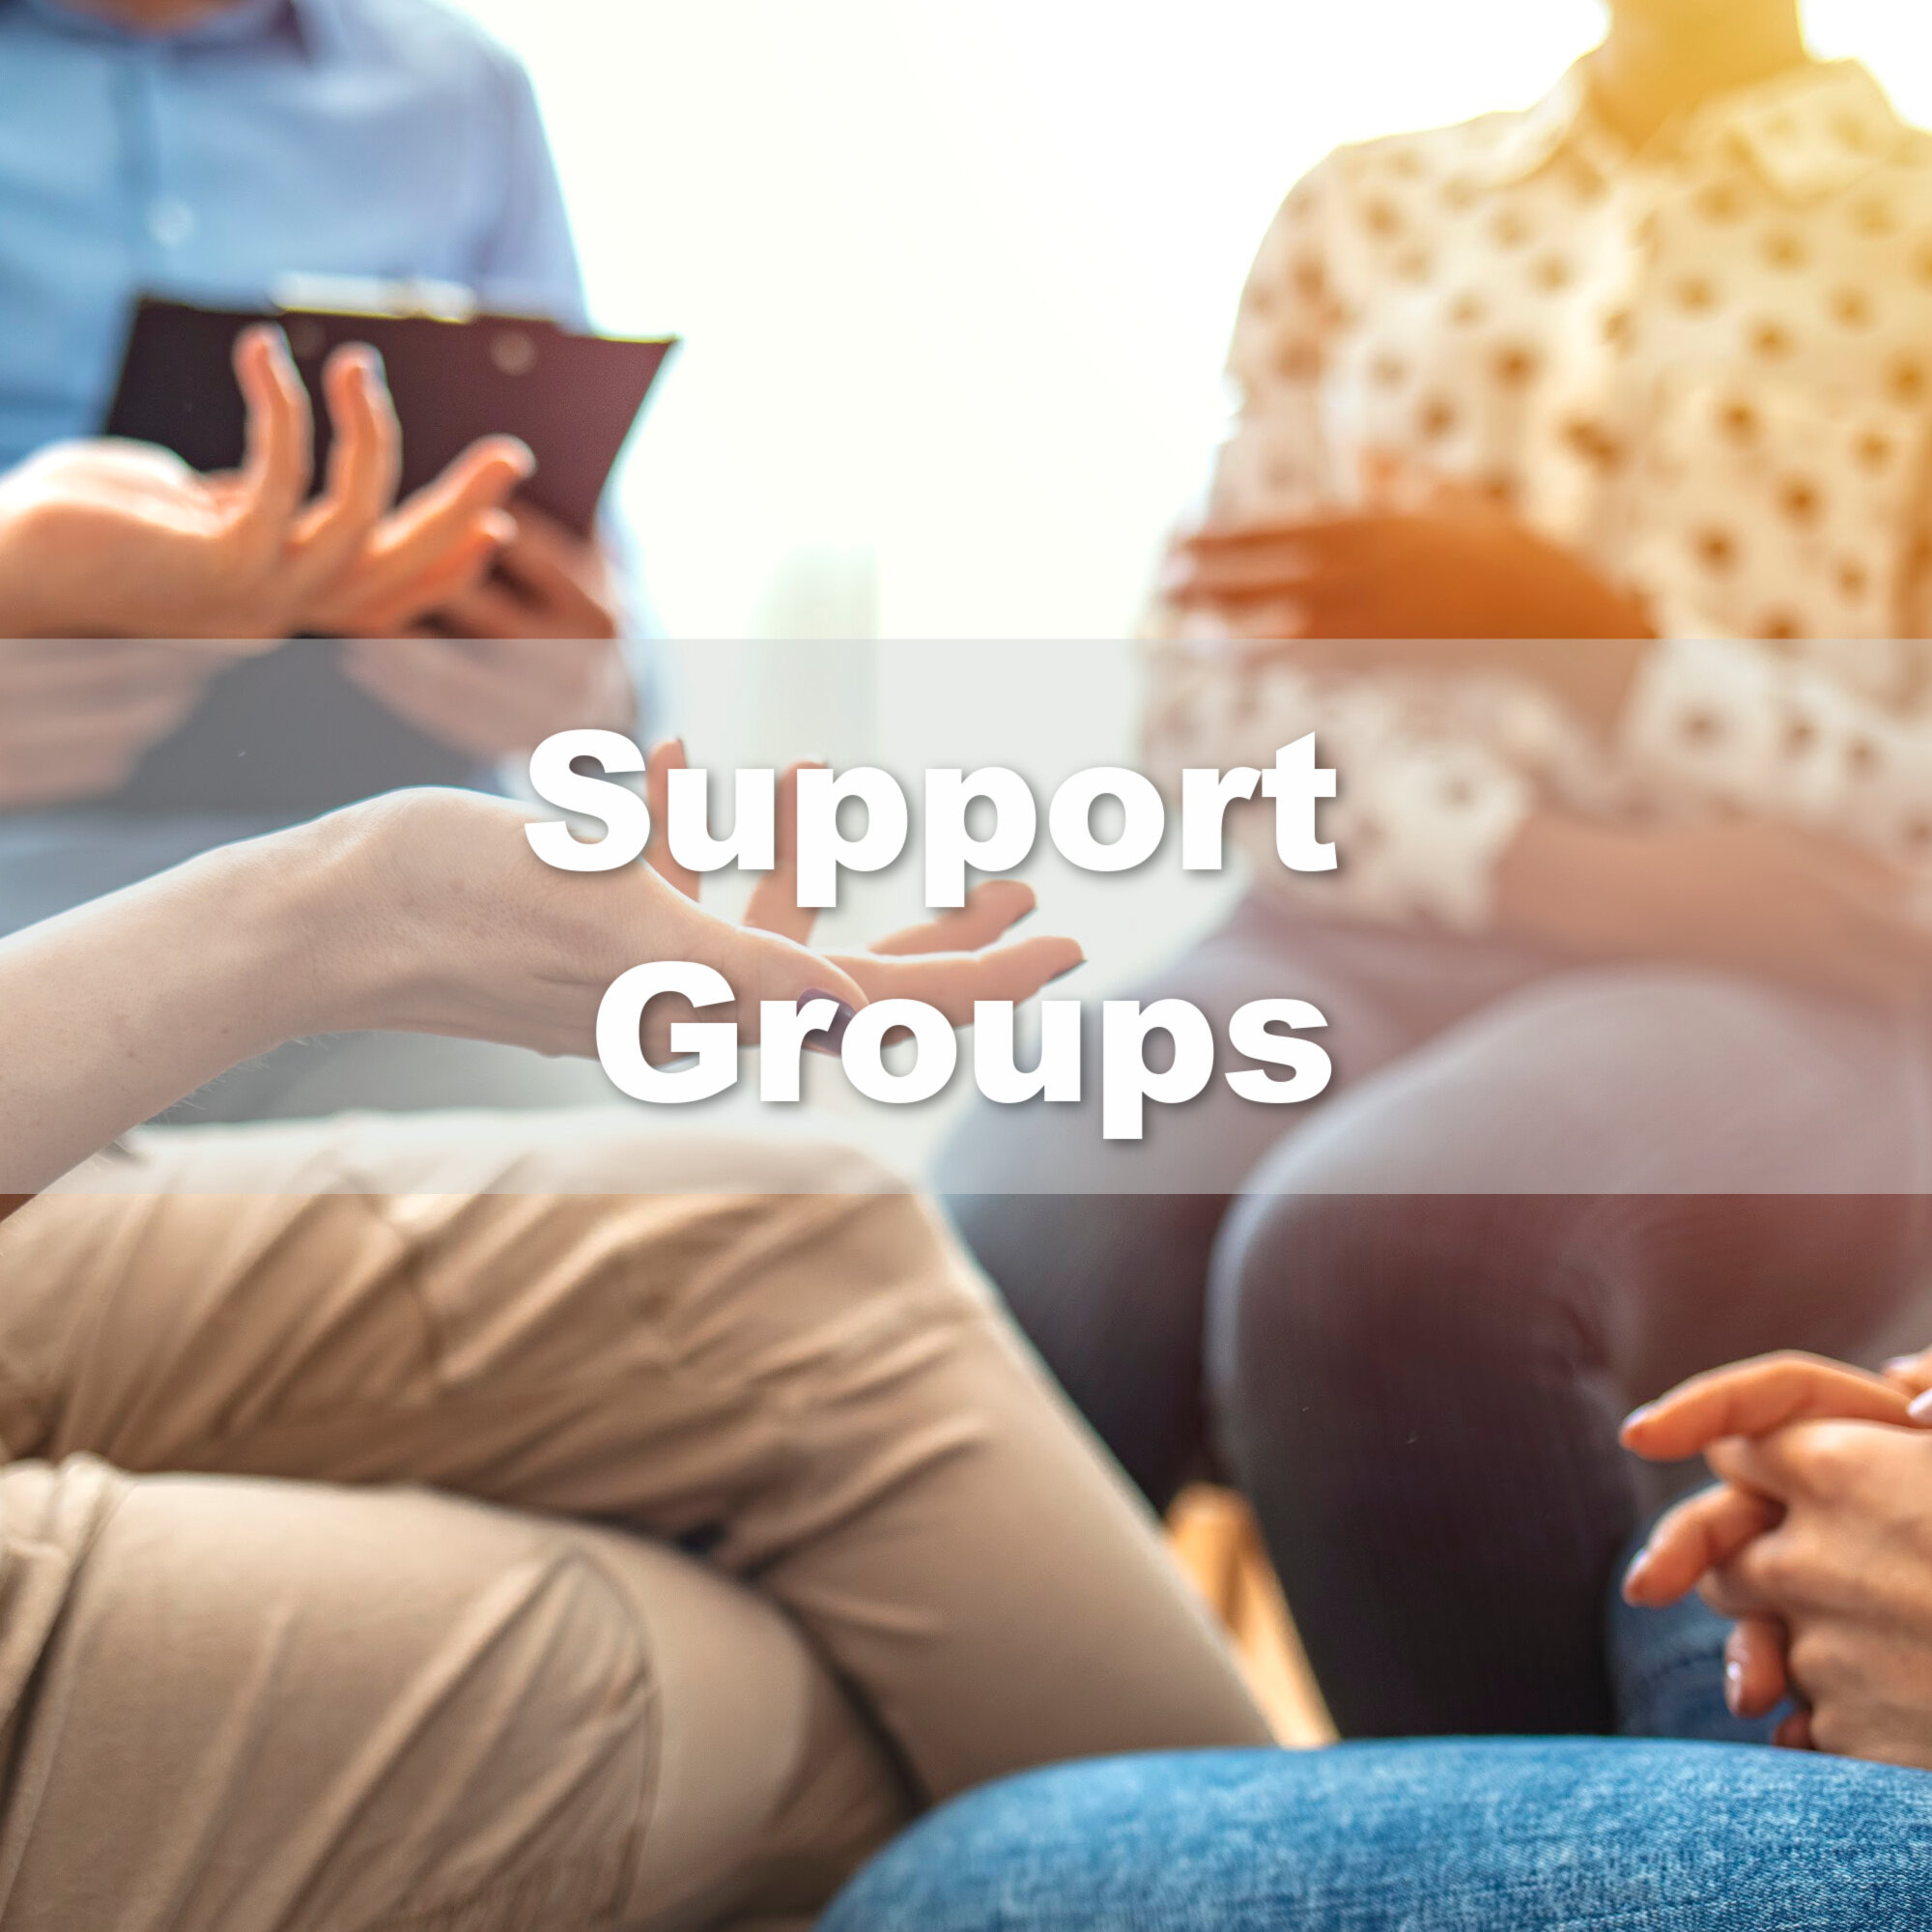 Support Groups (1).jpg